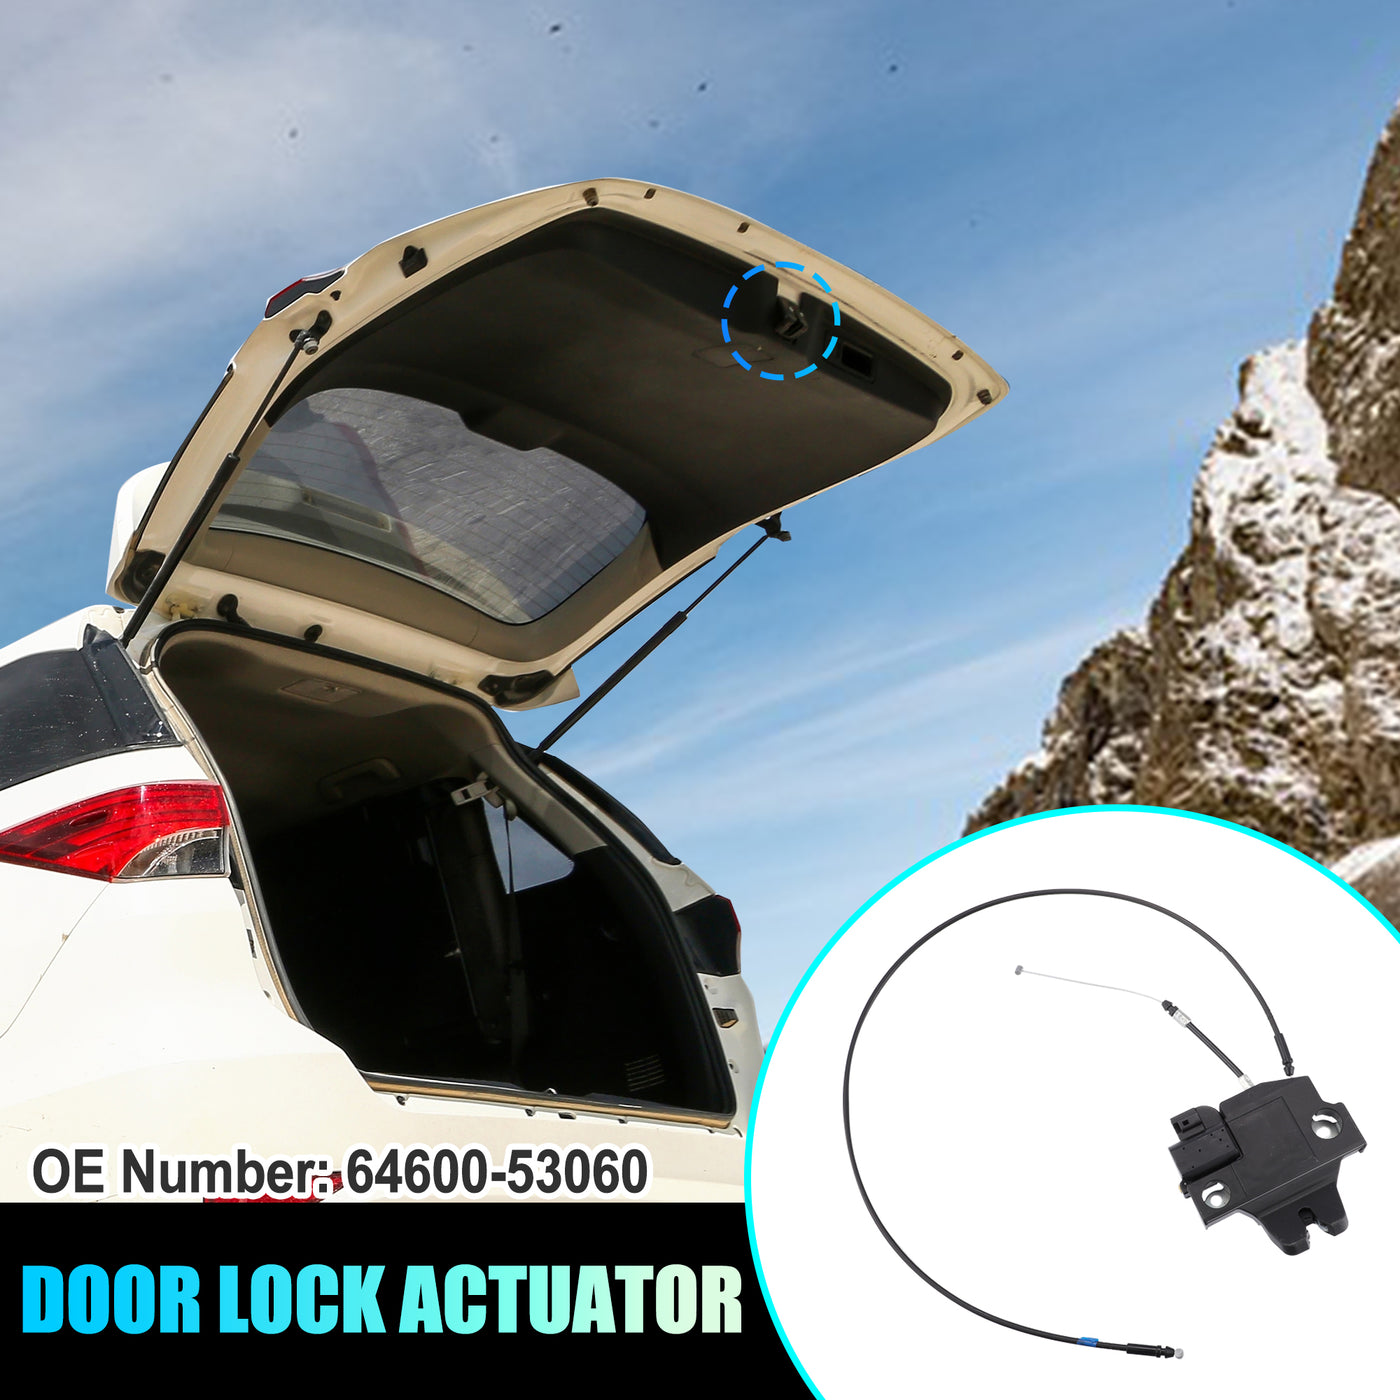 X AUTOHAUX Rear Trunk Latch Lock Actuator with Lock Cable 64600-53060 6460053060 for Lexus IS F 2008-2014 for IS250 IS350 2006-2013 Tailgate Lock